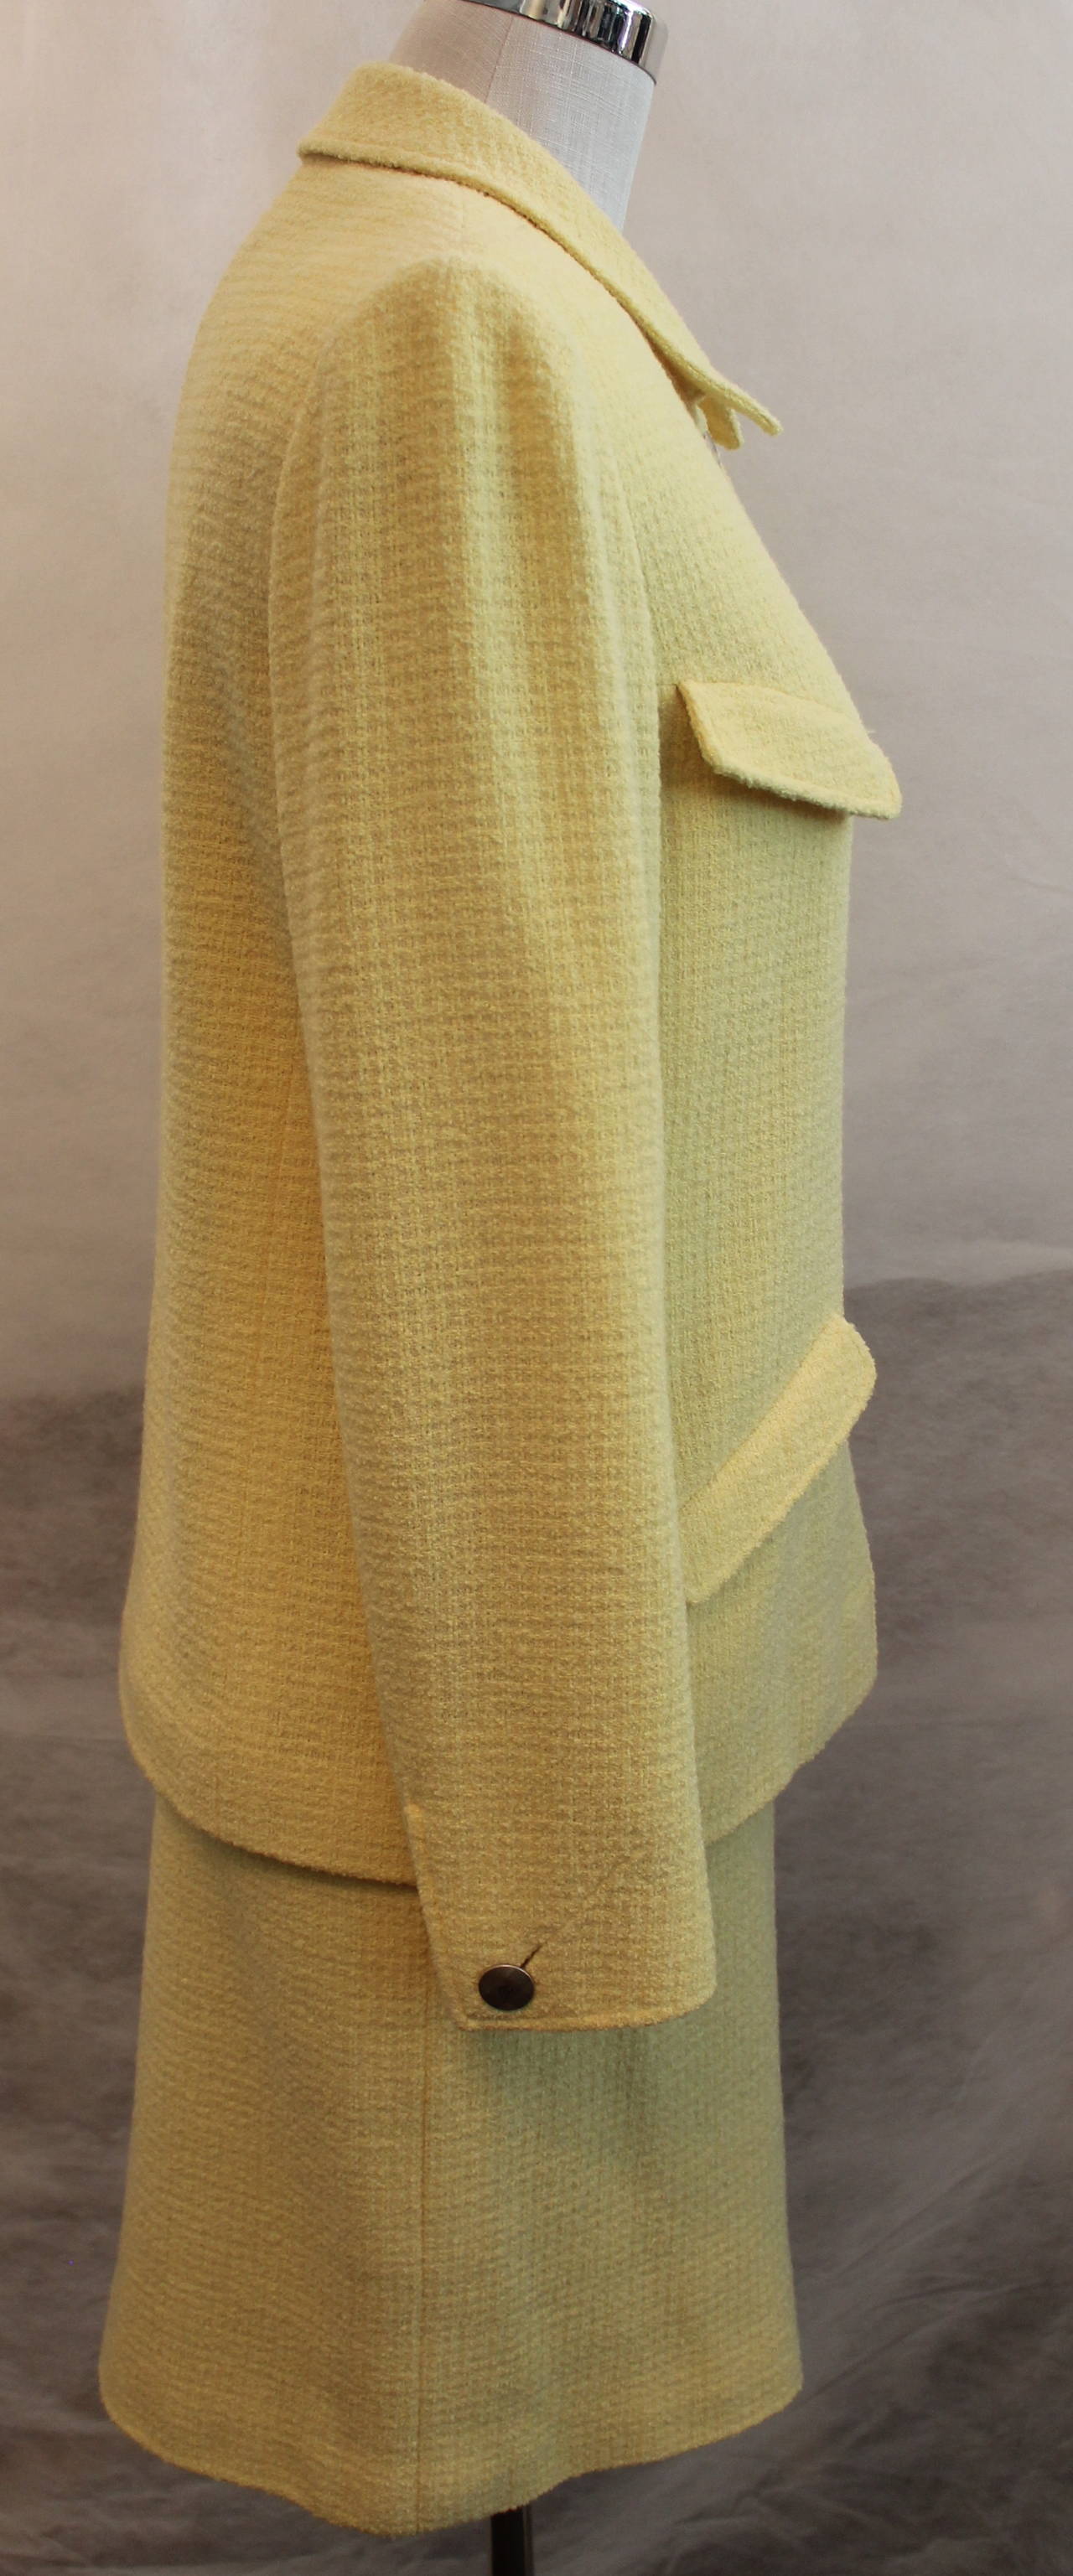 Chanel Pale Yellow Wool Blend Skirt Suit - 40 - Circa 1998
4 front flap pockets, silver buttons. This suit is in very good condition.
Measurements:
Jacket: Bust 37